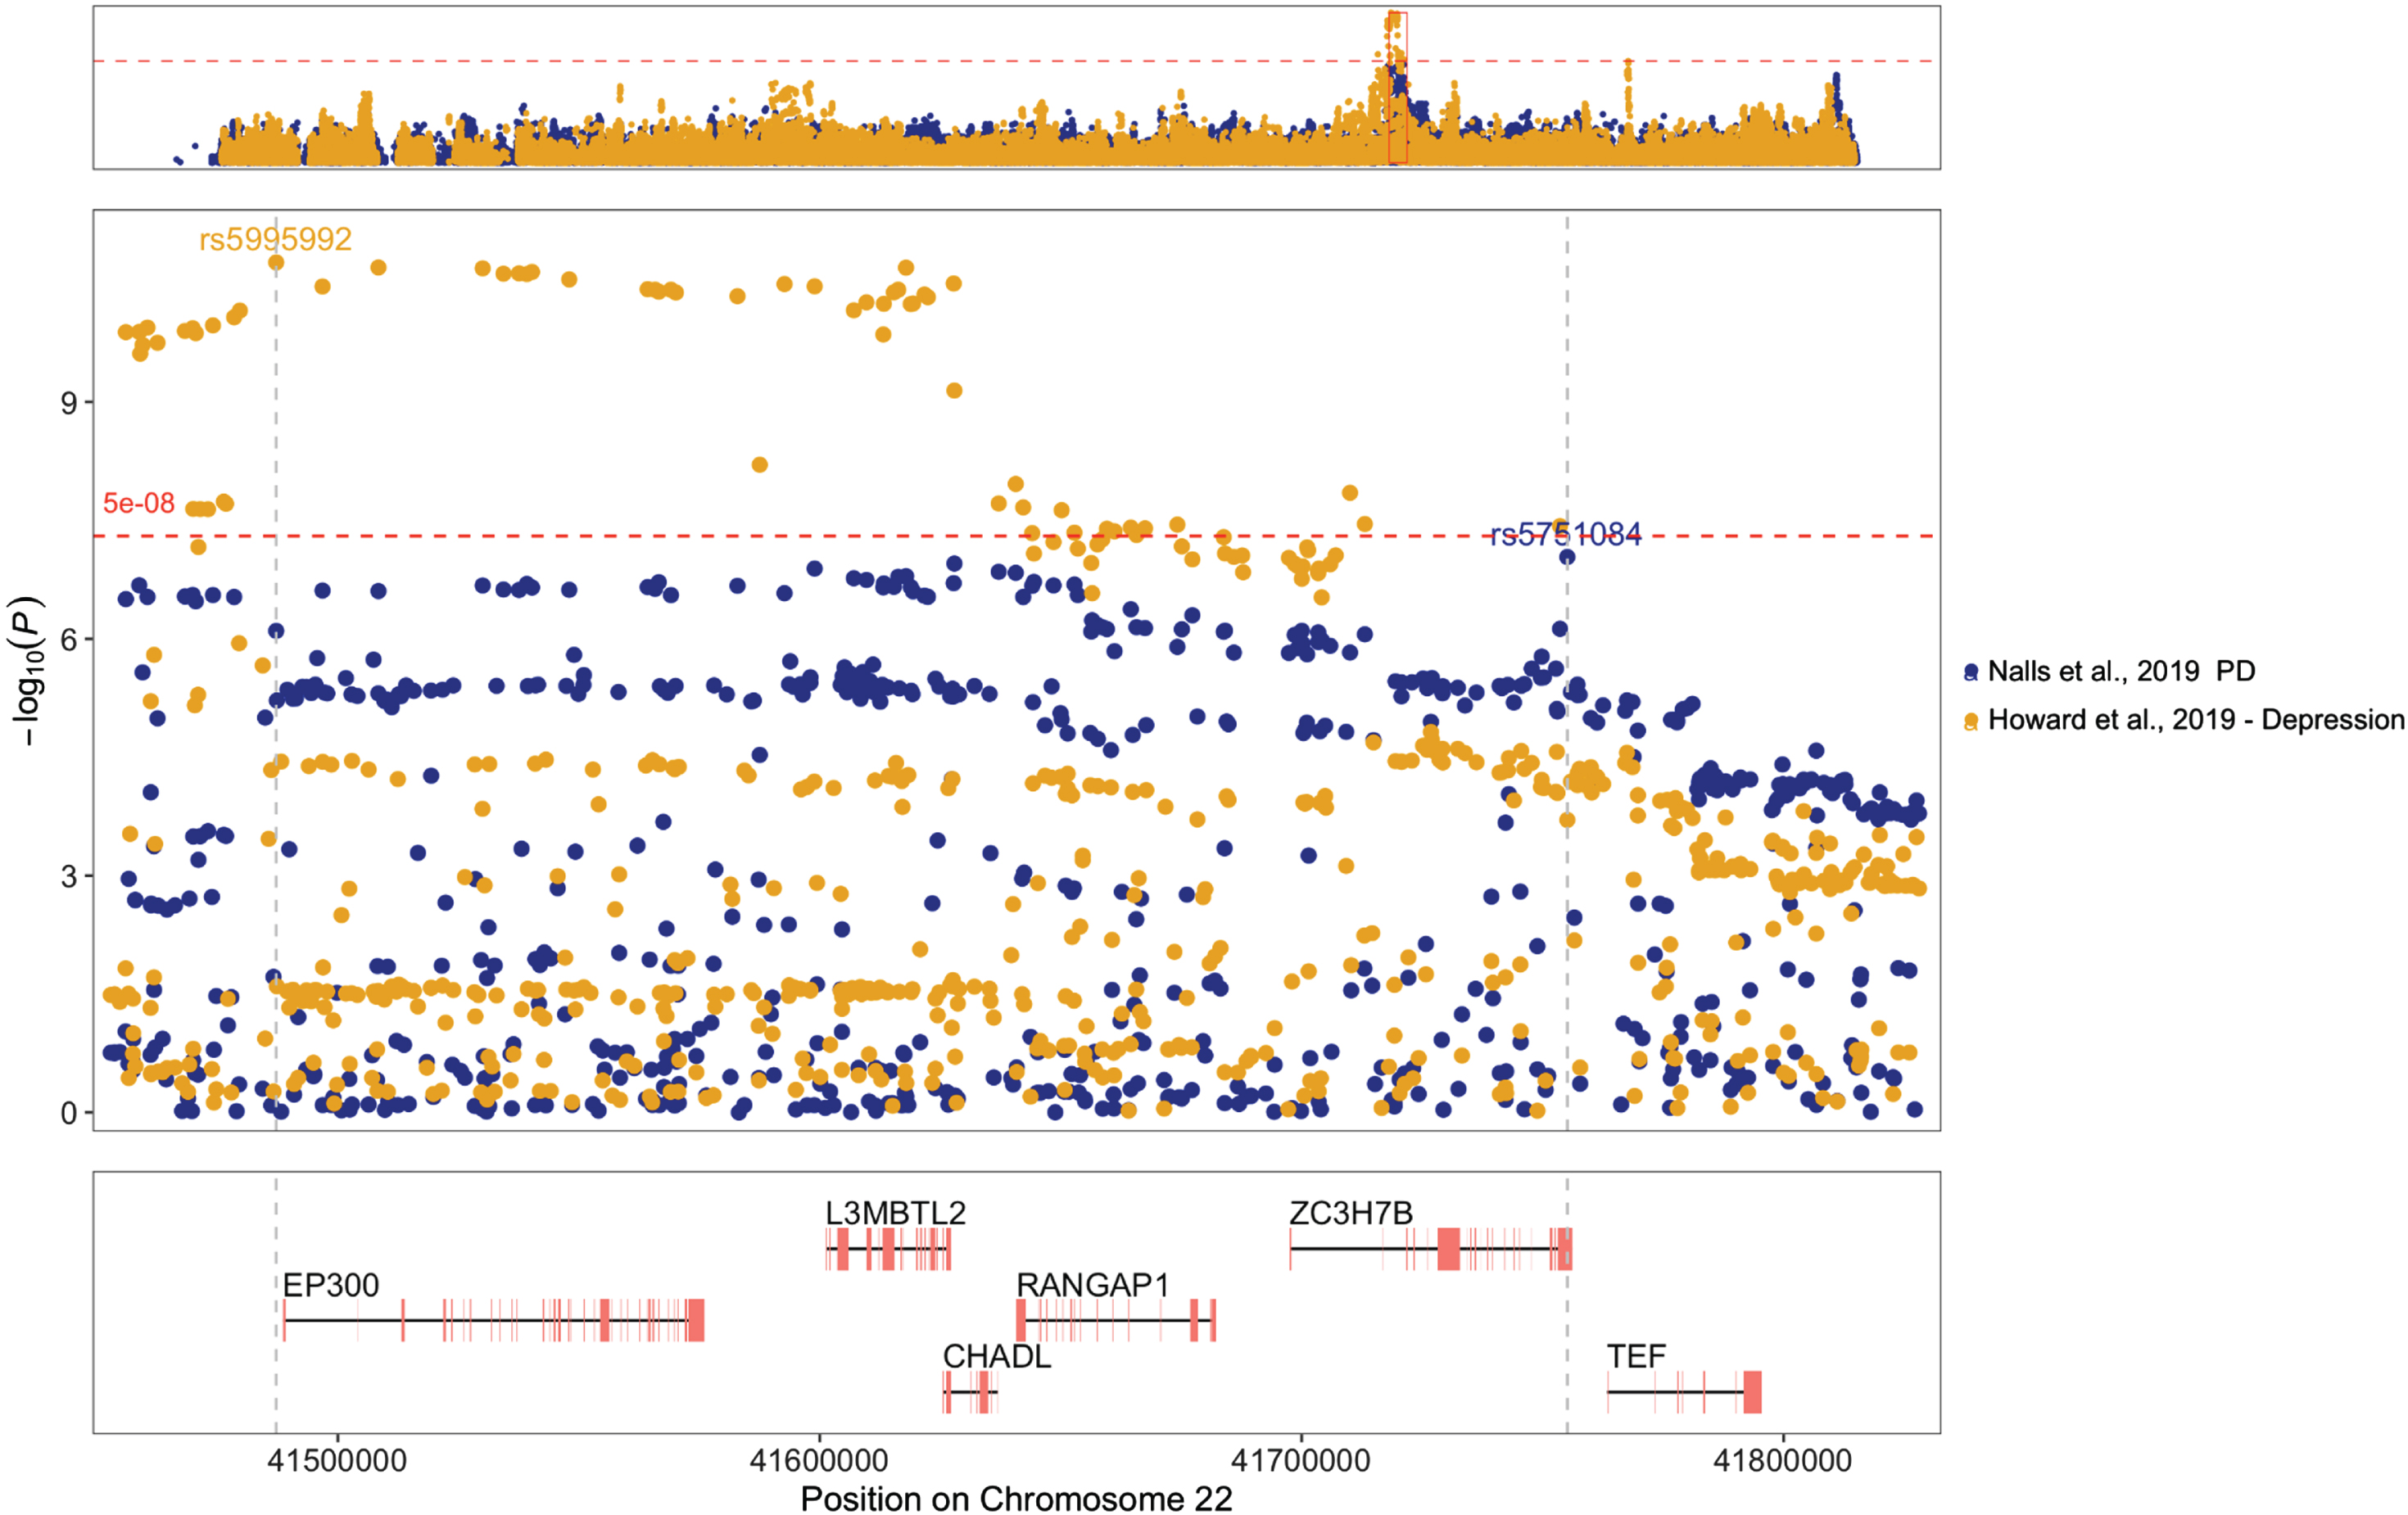 Regional plot for the chr22 : 41452876-41829000 region in GWAS summary statistics showing SNPs associated with Parkinson’s disease (PD) in blue and depression in yellow. Top variants within the region for each dataset are annotated by their rs number, and vertical gray dotted lines highlight their positions within the genes shown in the lower panel, which only includes protein-coding genes. The horizontal red dashed line represents the common genome-wide significance threshold.